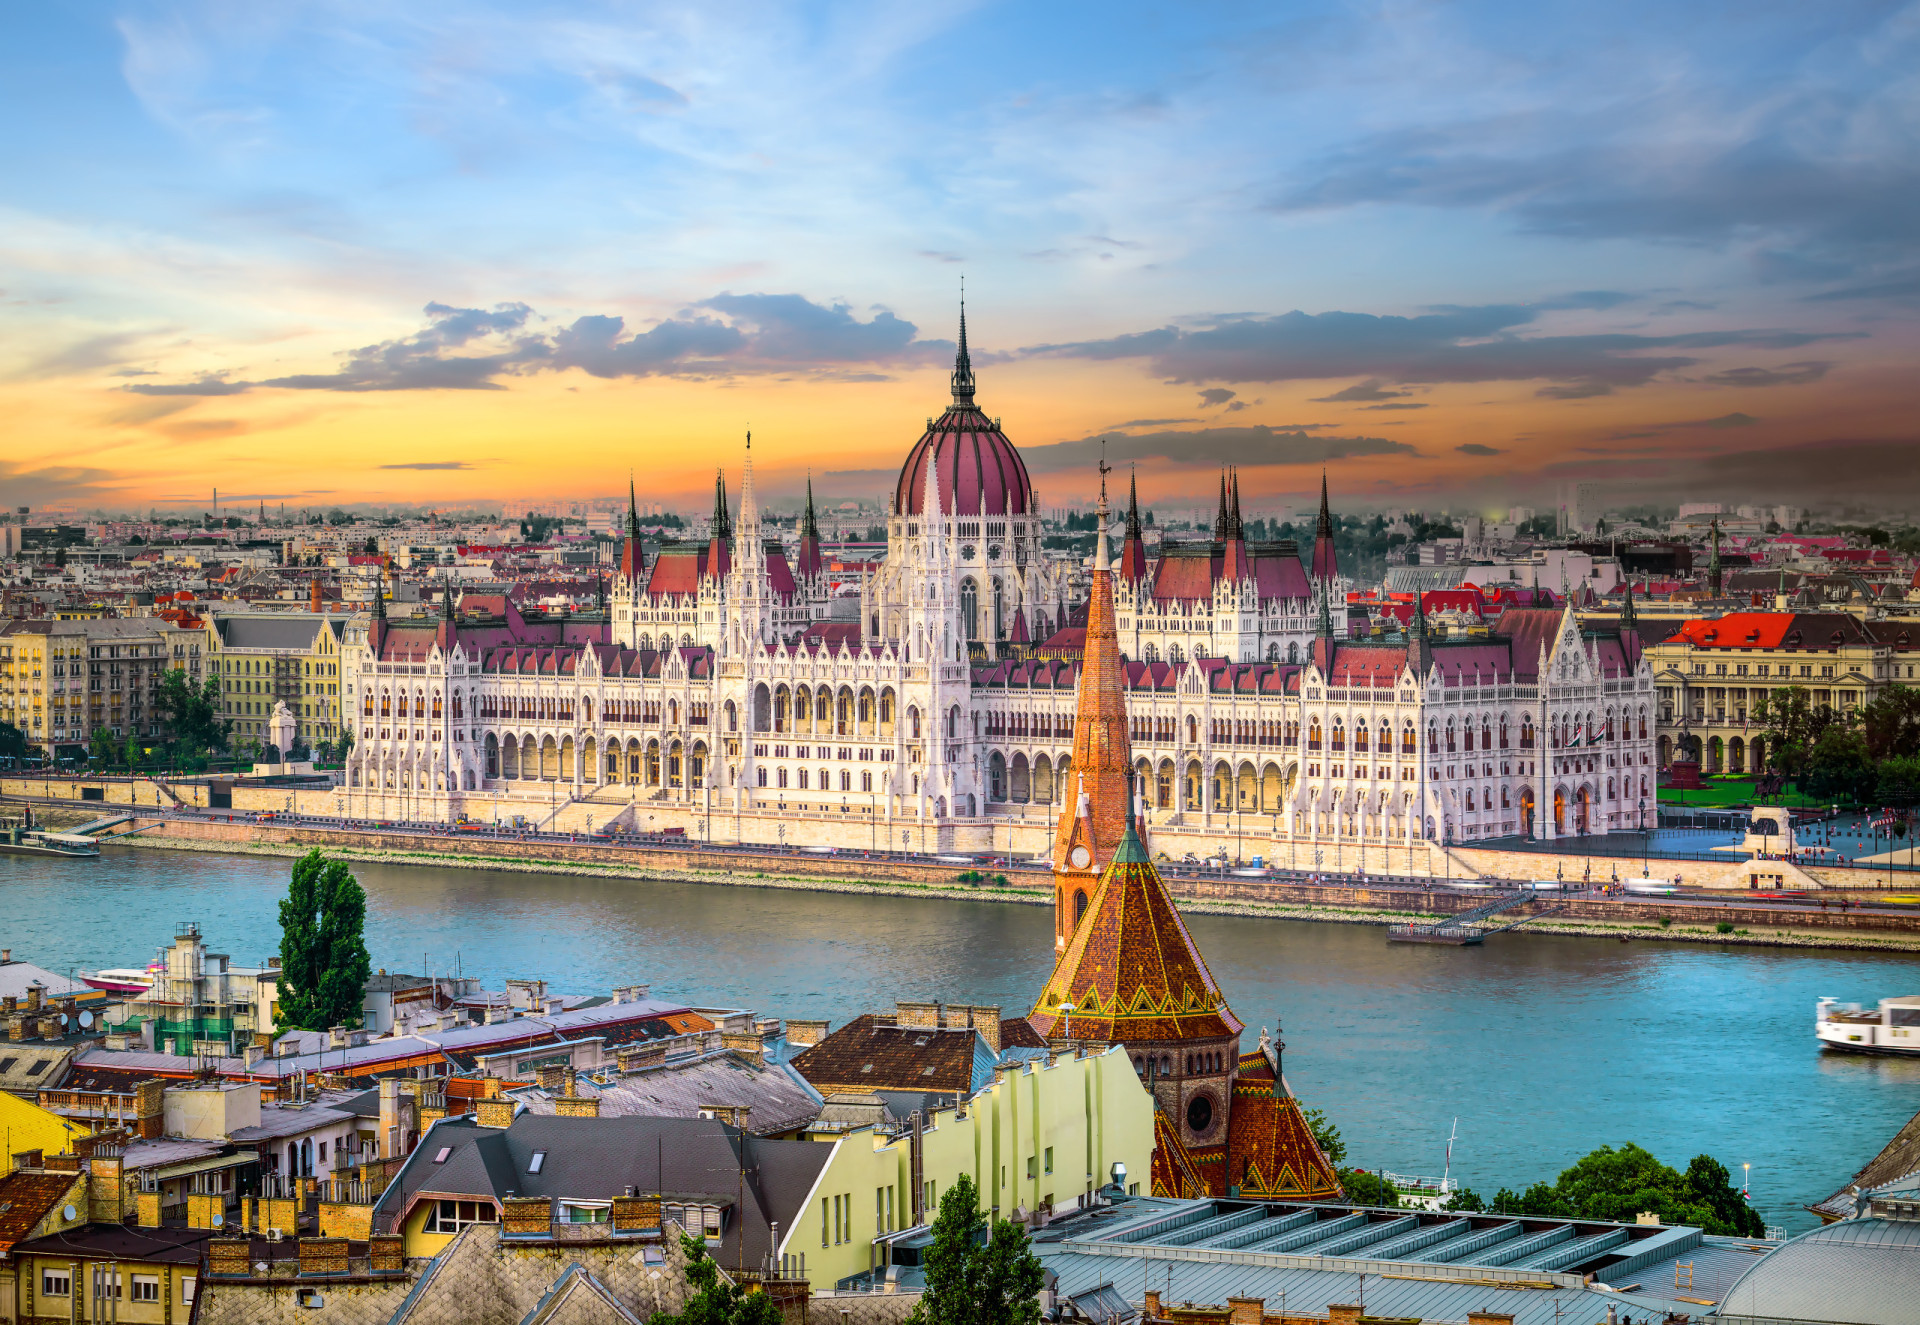 <p>Tourist tax in Hungary only applies in Budapest. Travelers have to pay an extra 4% nightly on the price of their room.</p><p>You may also like:<a href="https://www.starsinsider.com/n/337586?utm_source=msn.com&utm_medium=display&utm_campaign=referral_description&utm_content=683481en-my"> Surprising stars you didn't know owned sports teams and leagues</a></p>